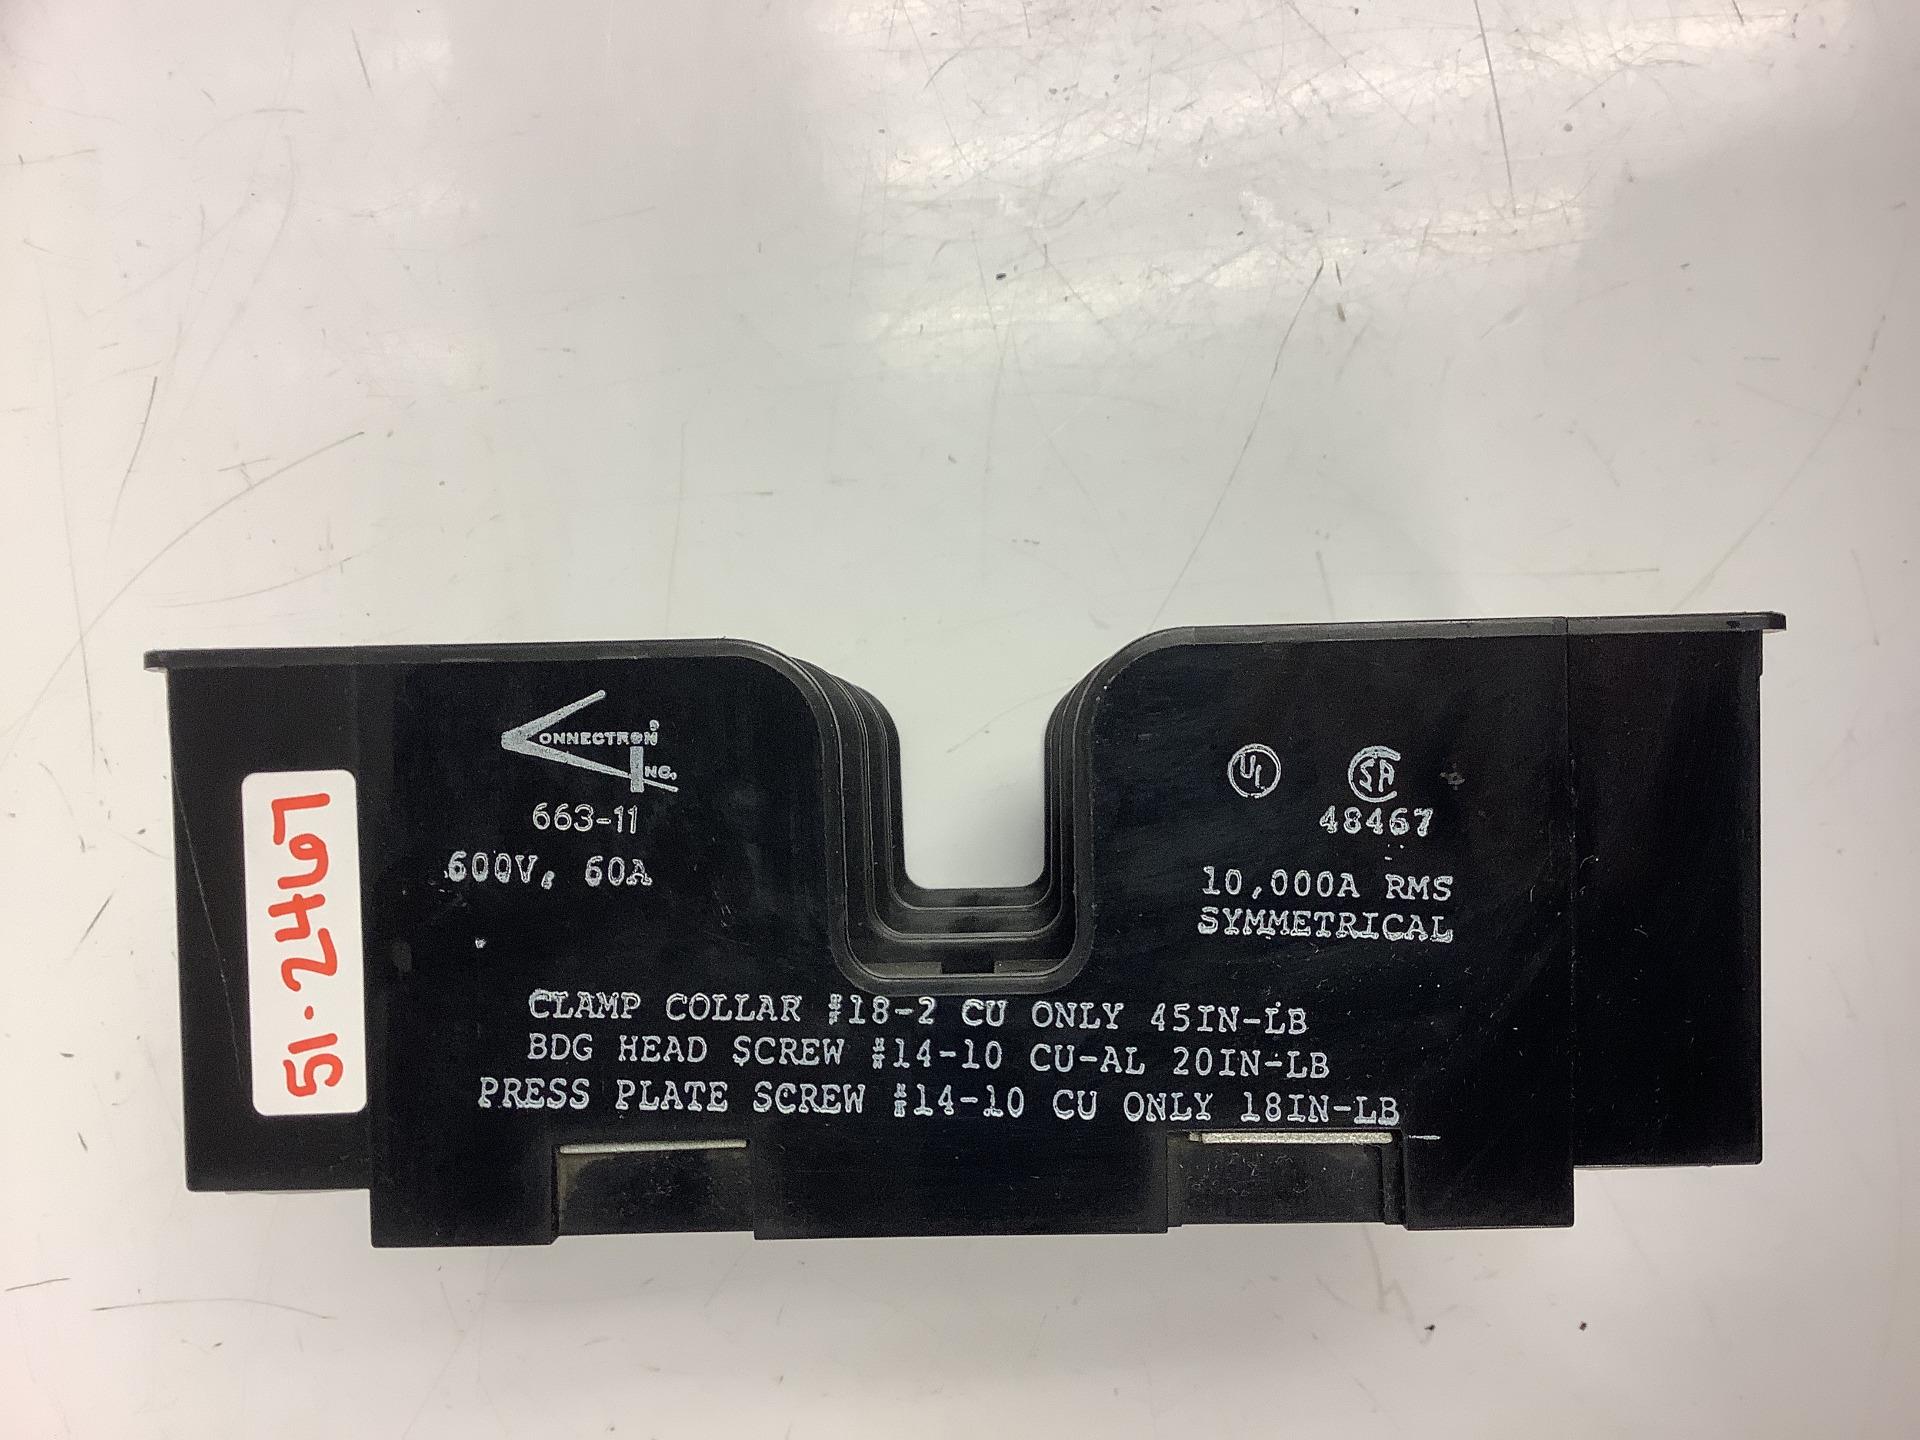 CONNECTRON 263-11 Fuse Holder 3POLE 250V 60A Type FB 